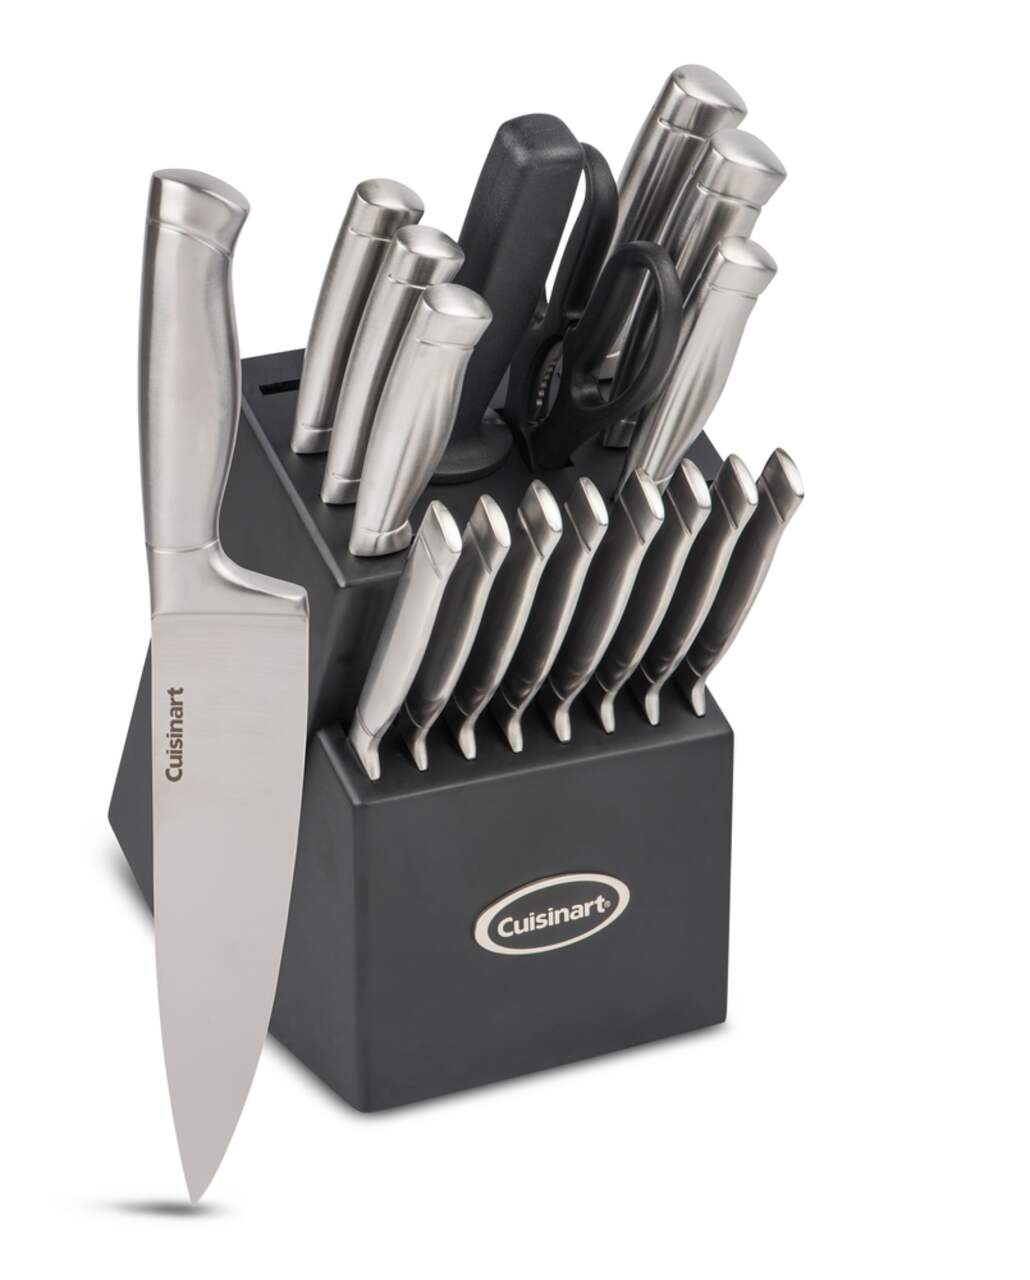 https://media-www.canadiantire.ca/product/living/kitchen/cutlery/1425470/cuisinart-forged-21pc-w-ceramic-set-c049d568-87ff-4645-96a3-9812736a2f99.png?imdensity=1&imwidth=640&impolicy=mZoom